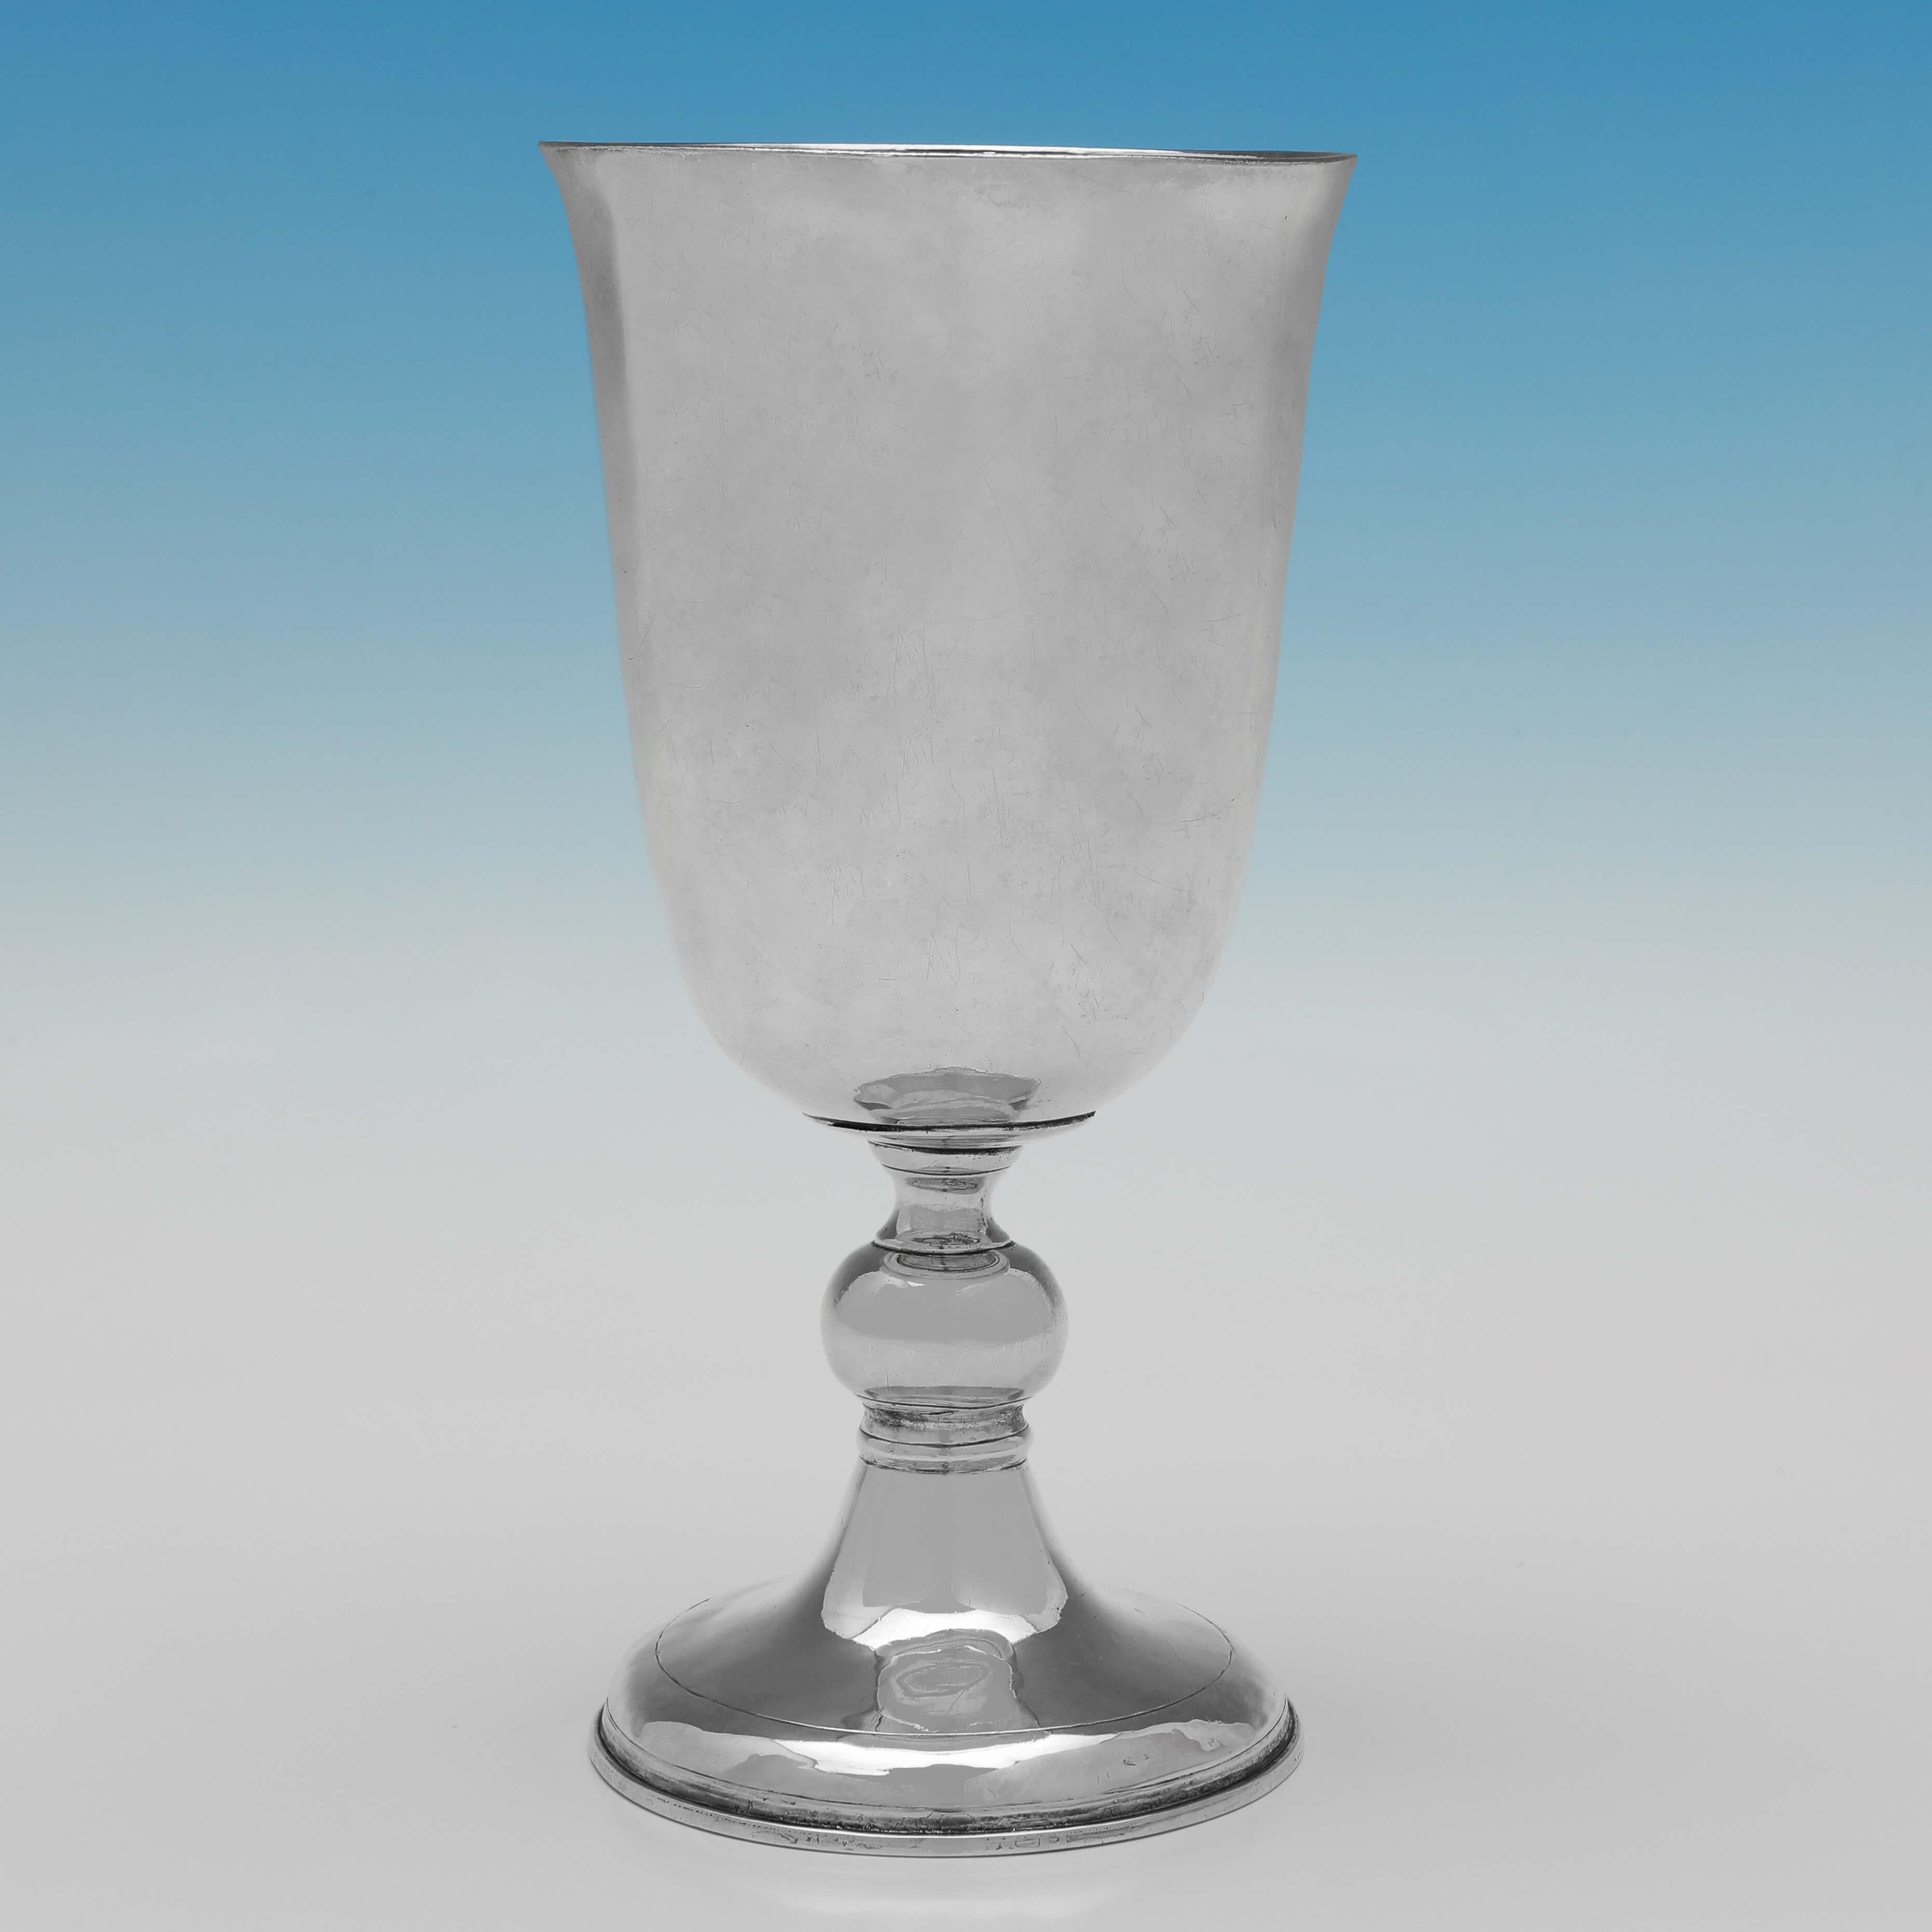 Hallmarked in London in 1705 by William Gamble, this outstanding, Queen Anne period, antique sterling silver chalice, is plain in style, standing on a pedestal foot detailed with reed borders. The chalice measures 7.5